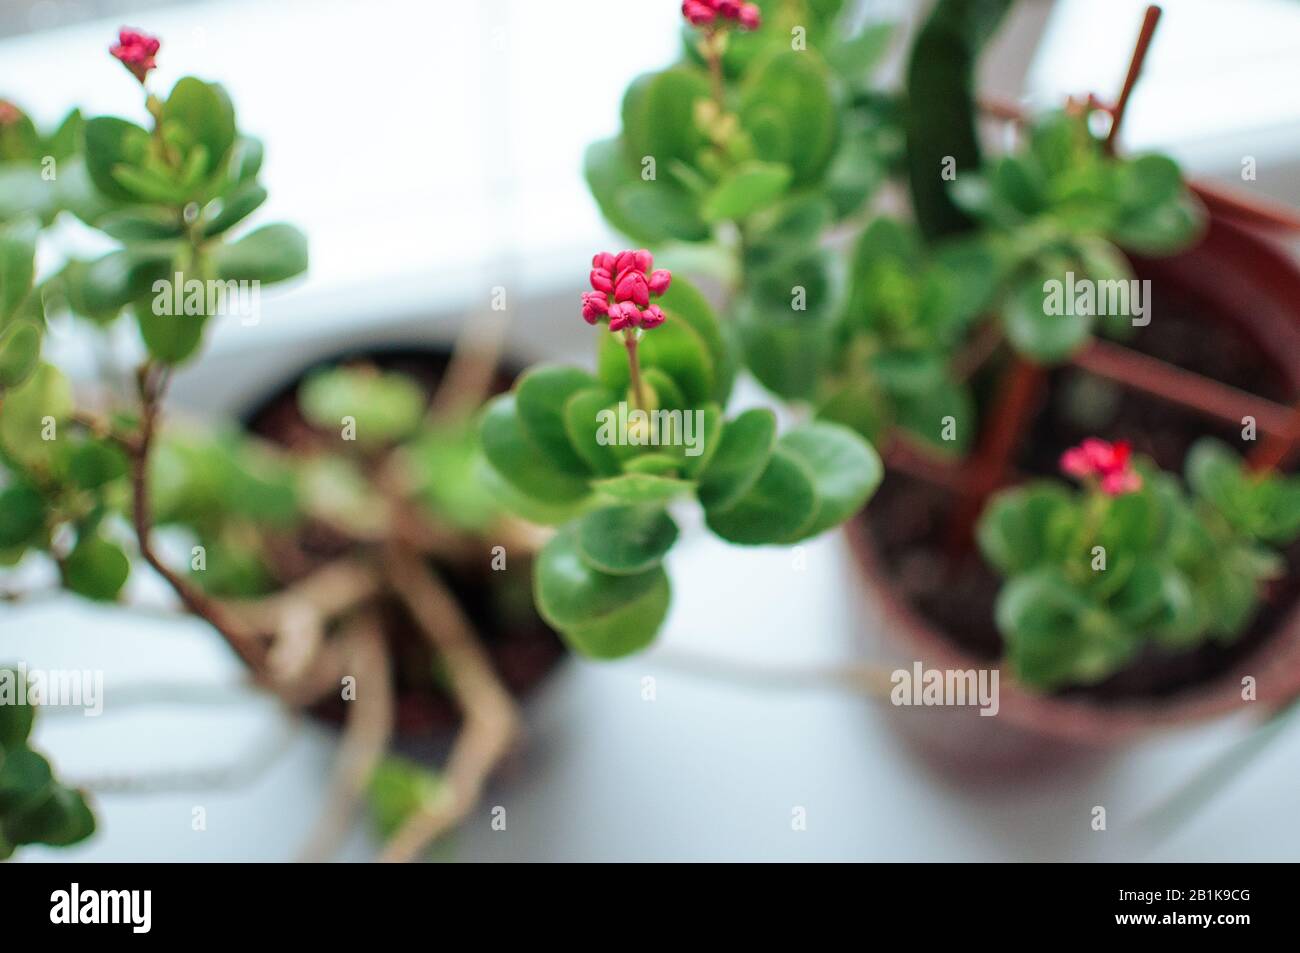 Bright pink autumn floral heads of succulent sedum or Hylotelephium spectabile, an ice plant or stonecrop, in a clay pot on a windowsill. Template for Stock Photo